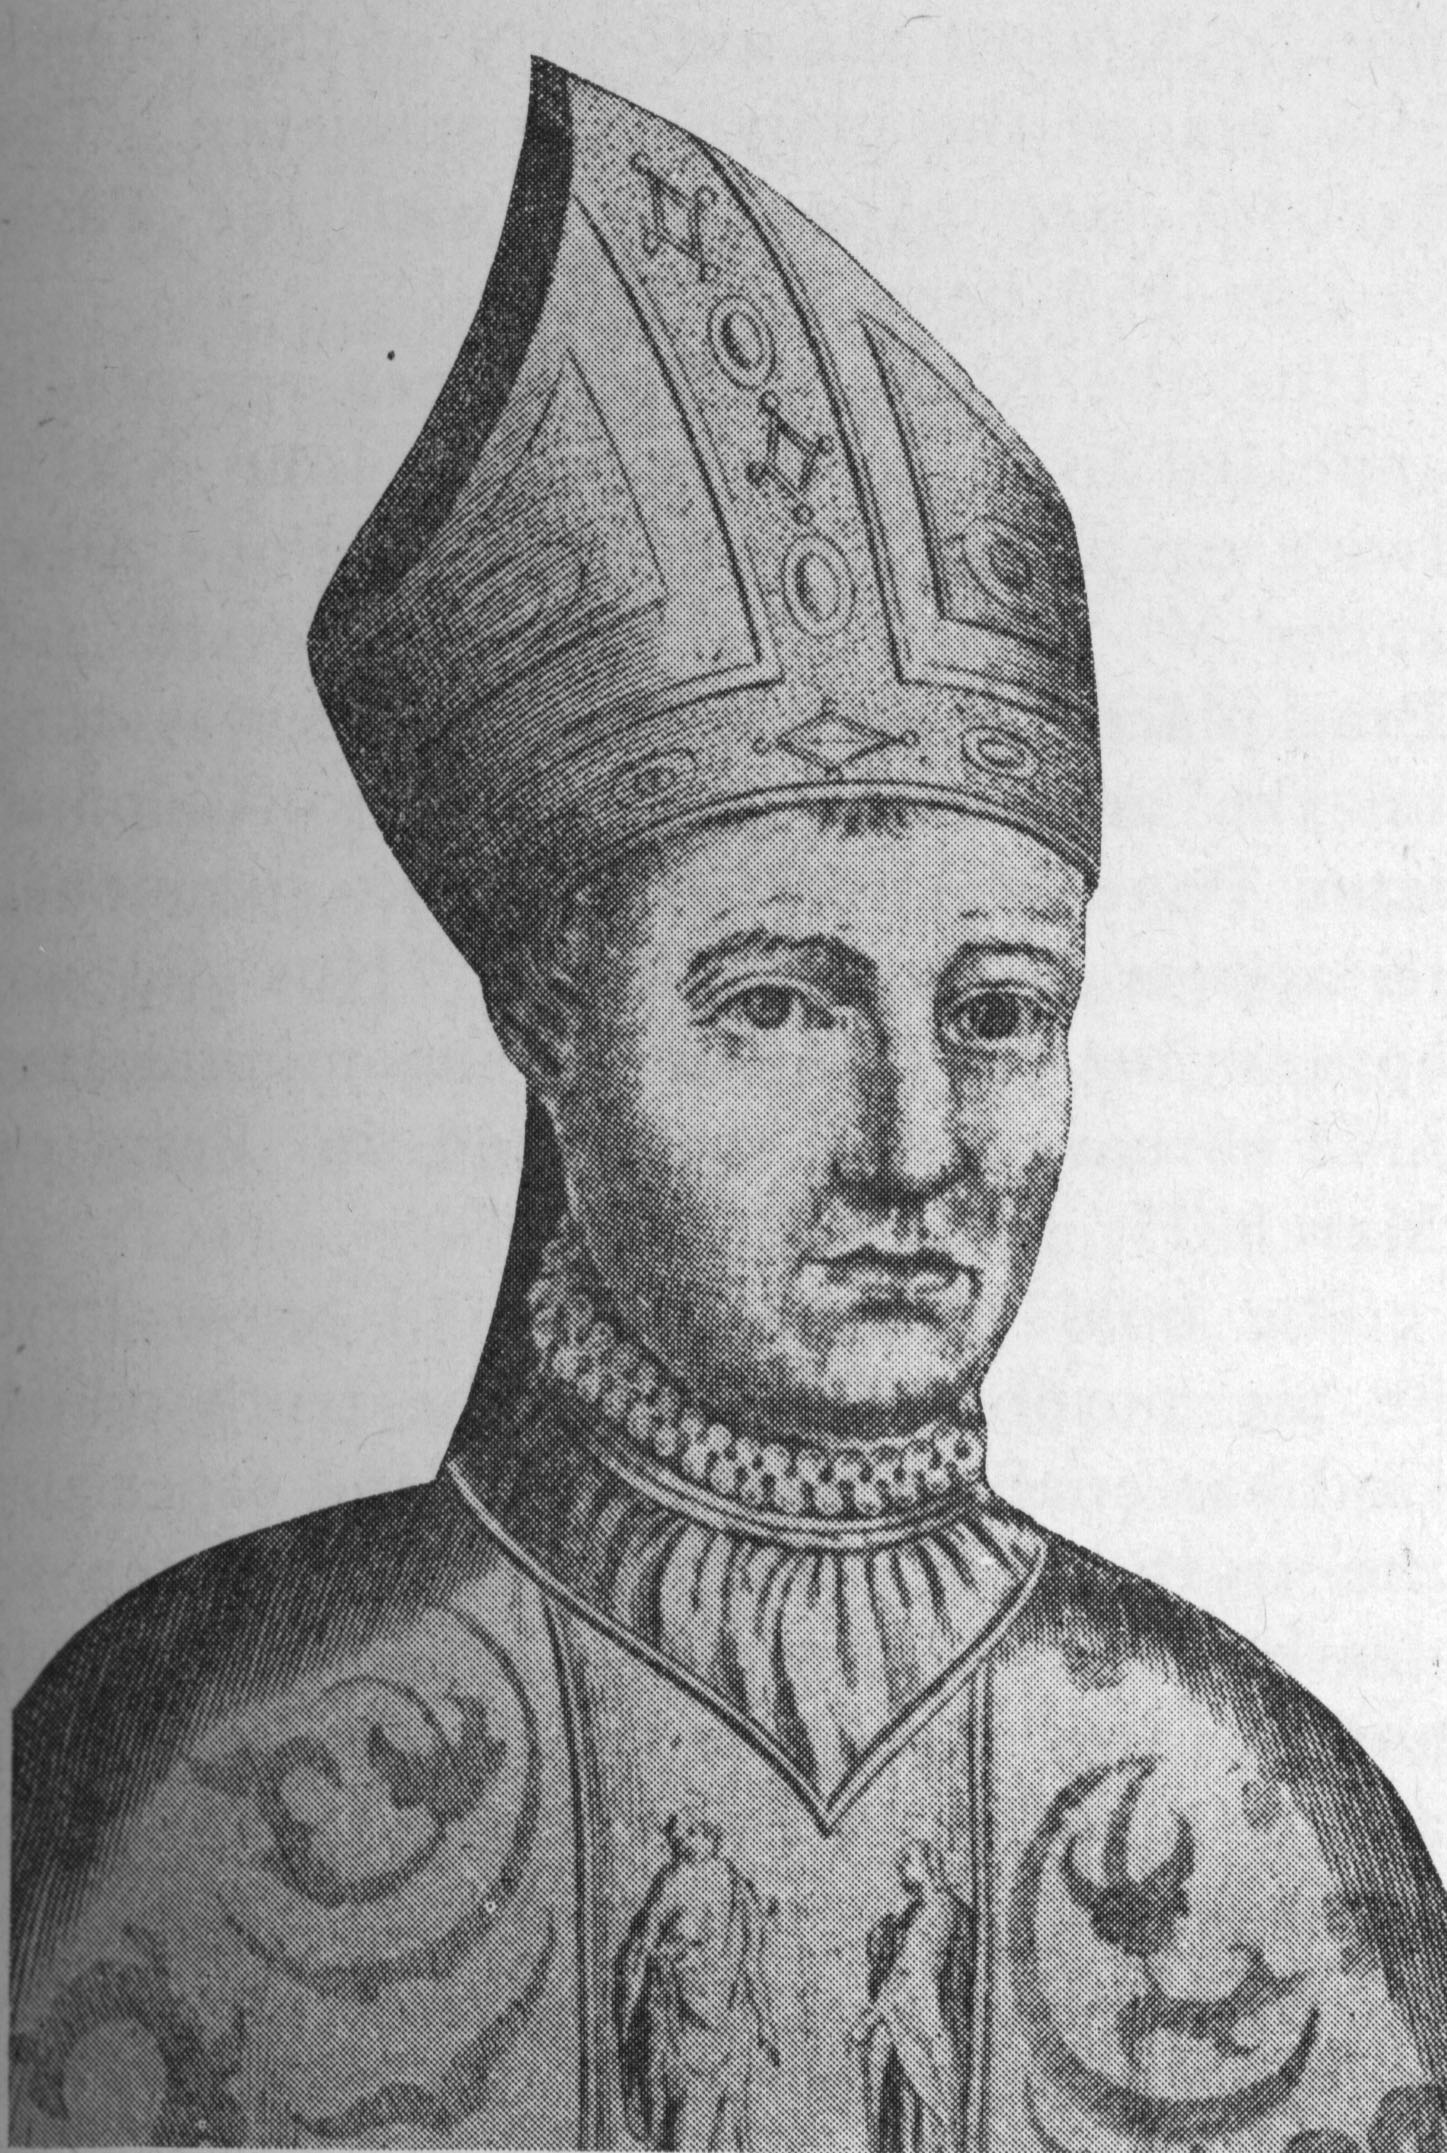 (Image found in “John Hus: A Brief Story of the Life of a Martyr” by William Dallmann) - Pope-John-XXIII